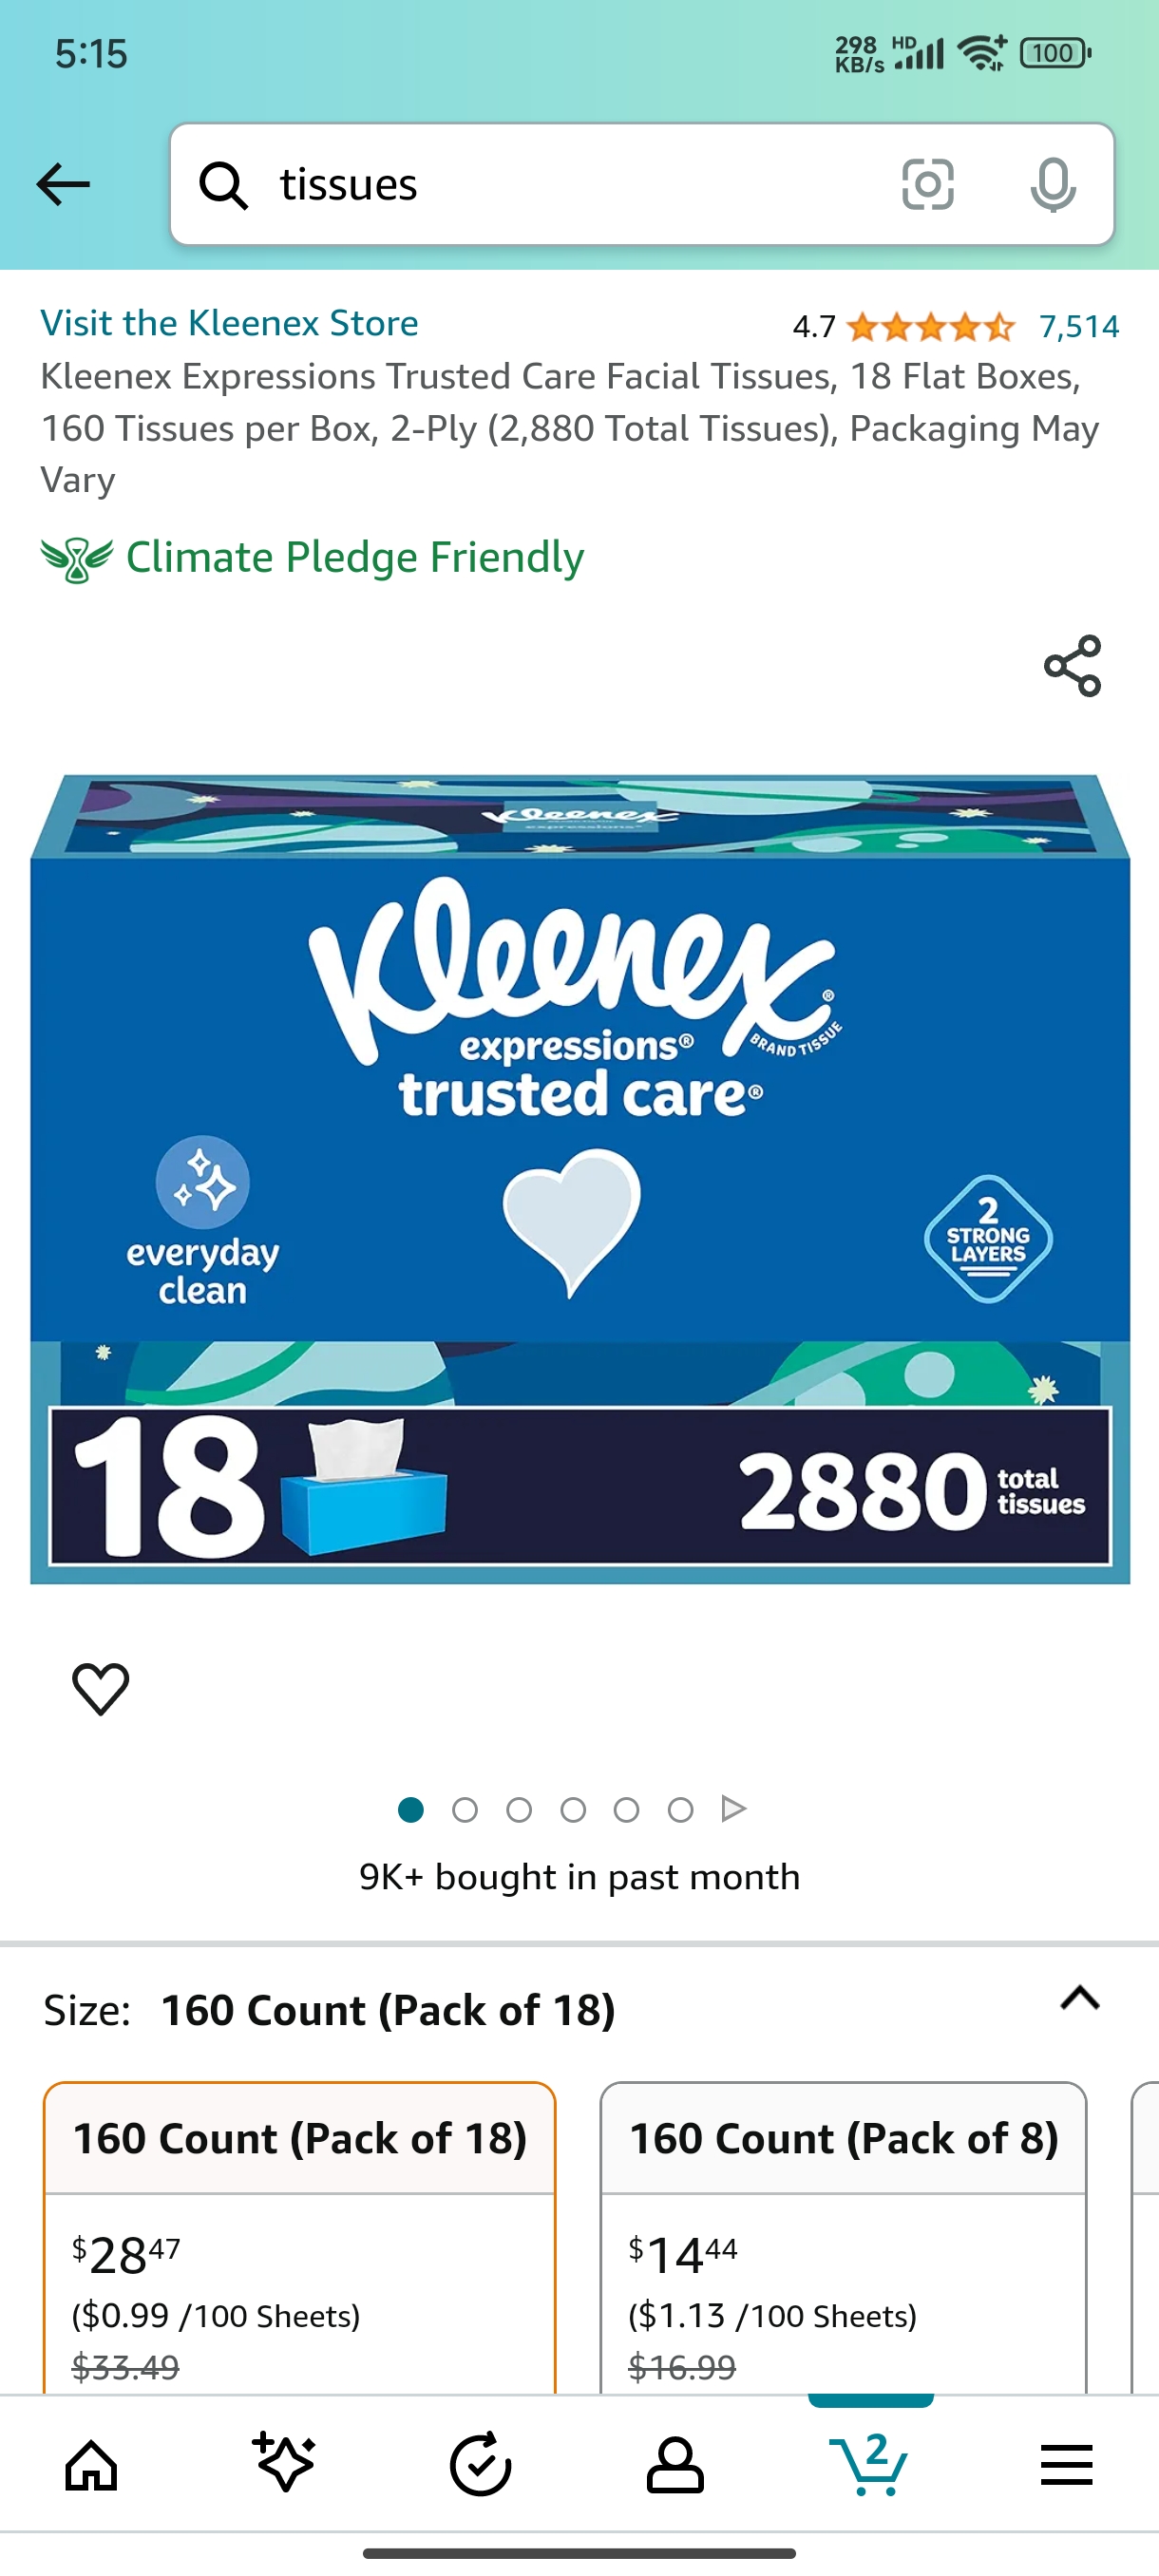 Kleenex Expressions Trusted Care Facial Tissues, 18 Flat Boxes, 160 Tissues per Box, 2-Ply (2,880 Total Tissues), Packaging May Vary : Health & Household